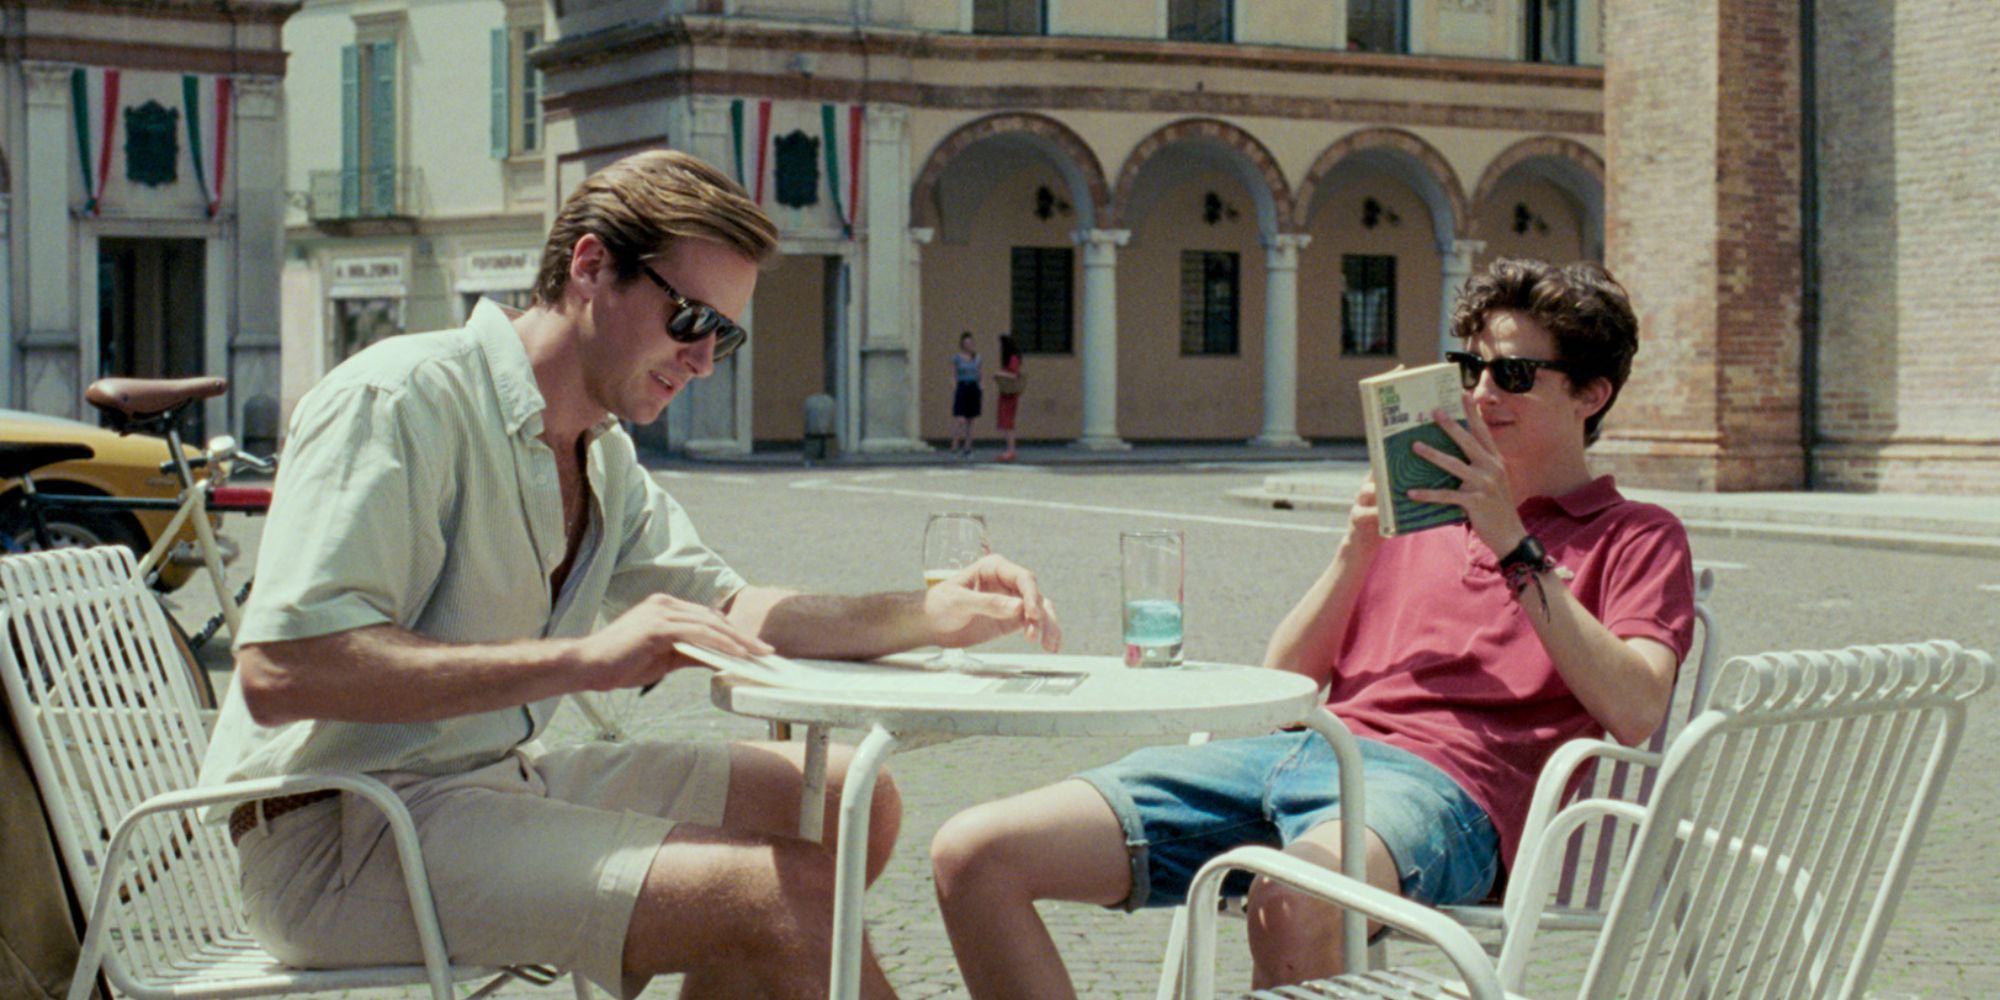 Timothée Chalamet and Armie Hammer in Call Me by Your Name sitting on a table together with drinks